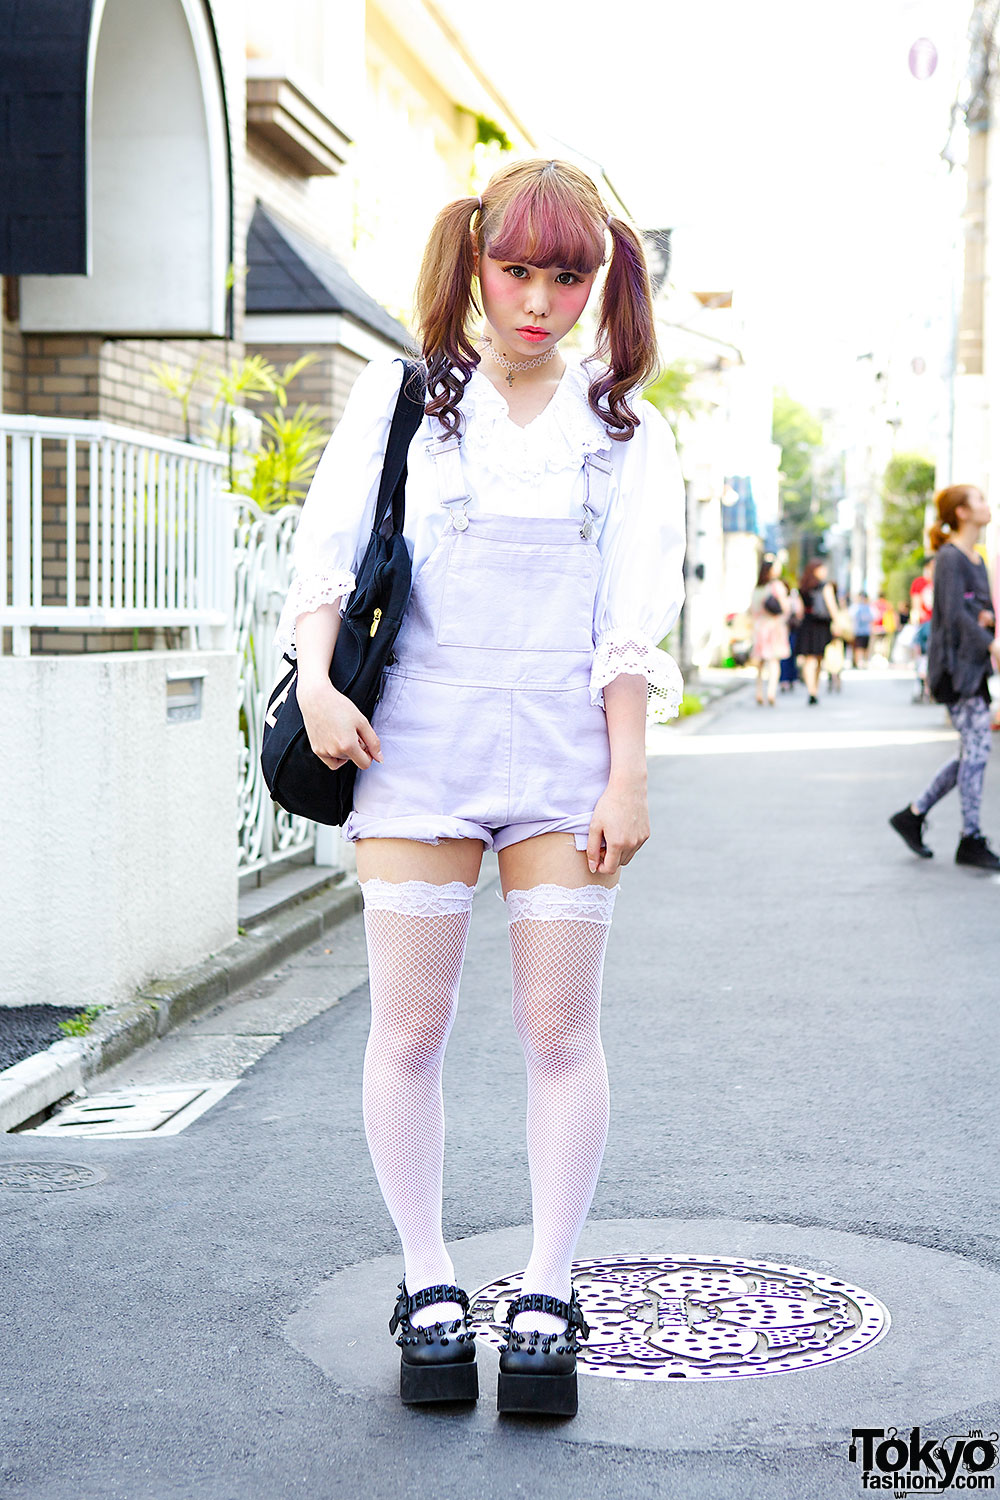 Kawaii Harajuku Style w/ Ombre Twintails, Fishnet Thigh Highs & Candy ...